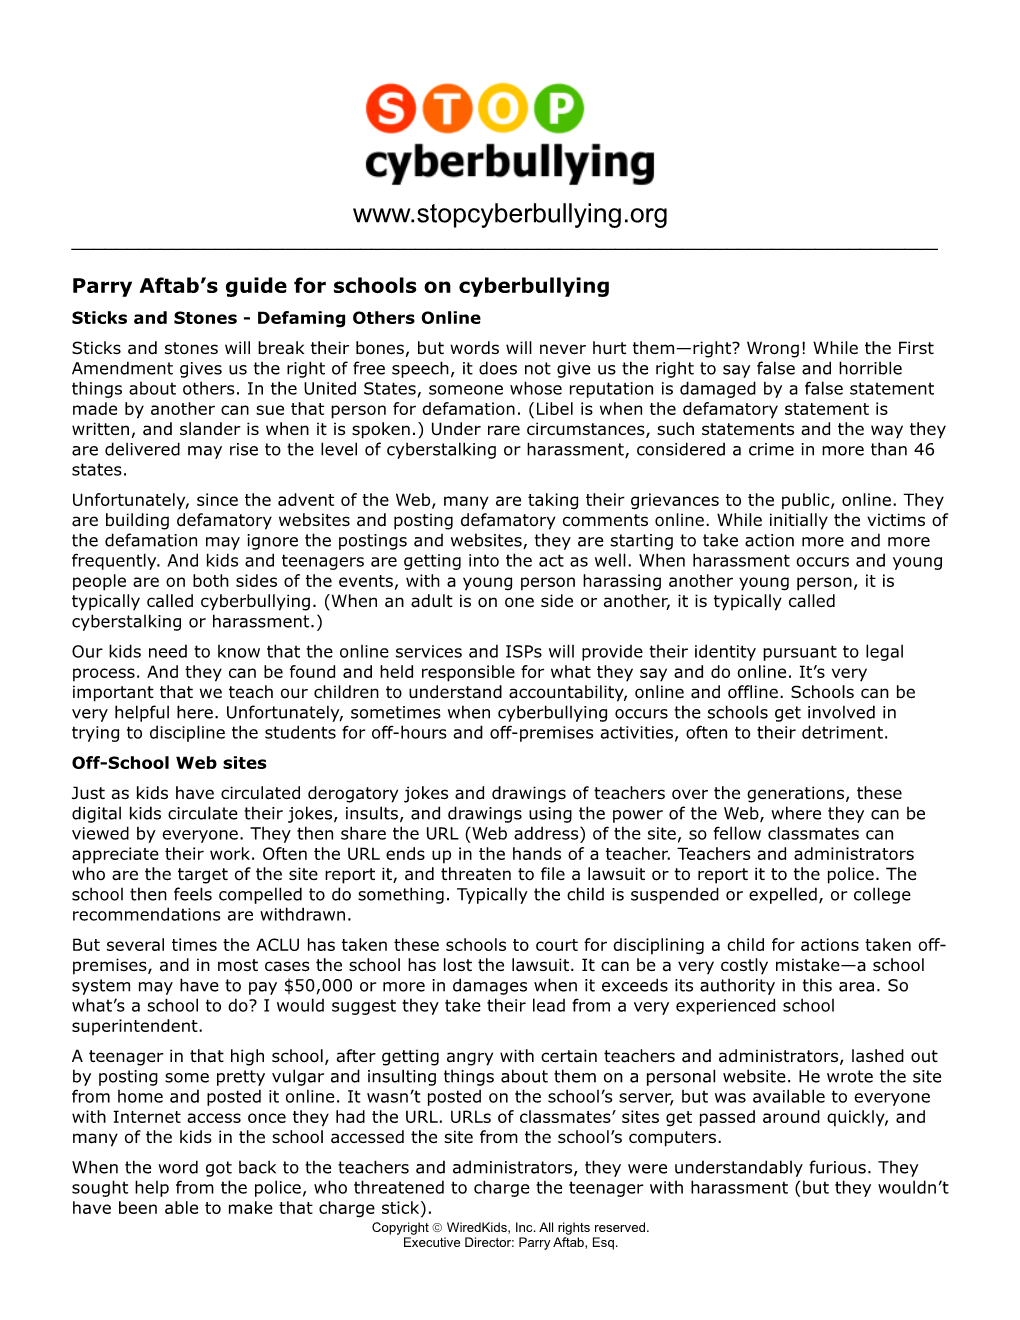 Parry Aftab S Guide for Schools on Cyberbullying